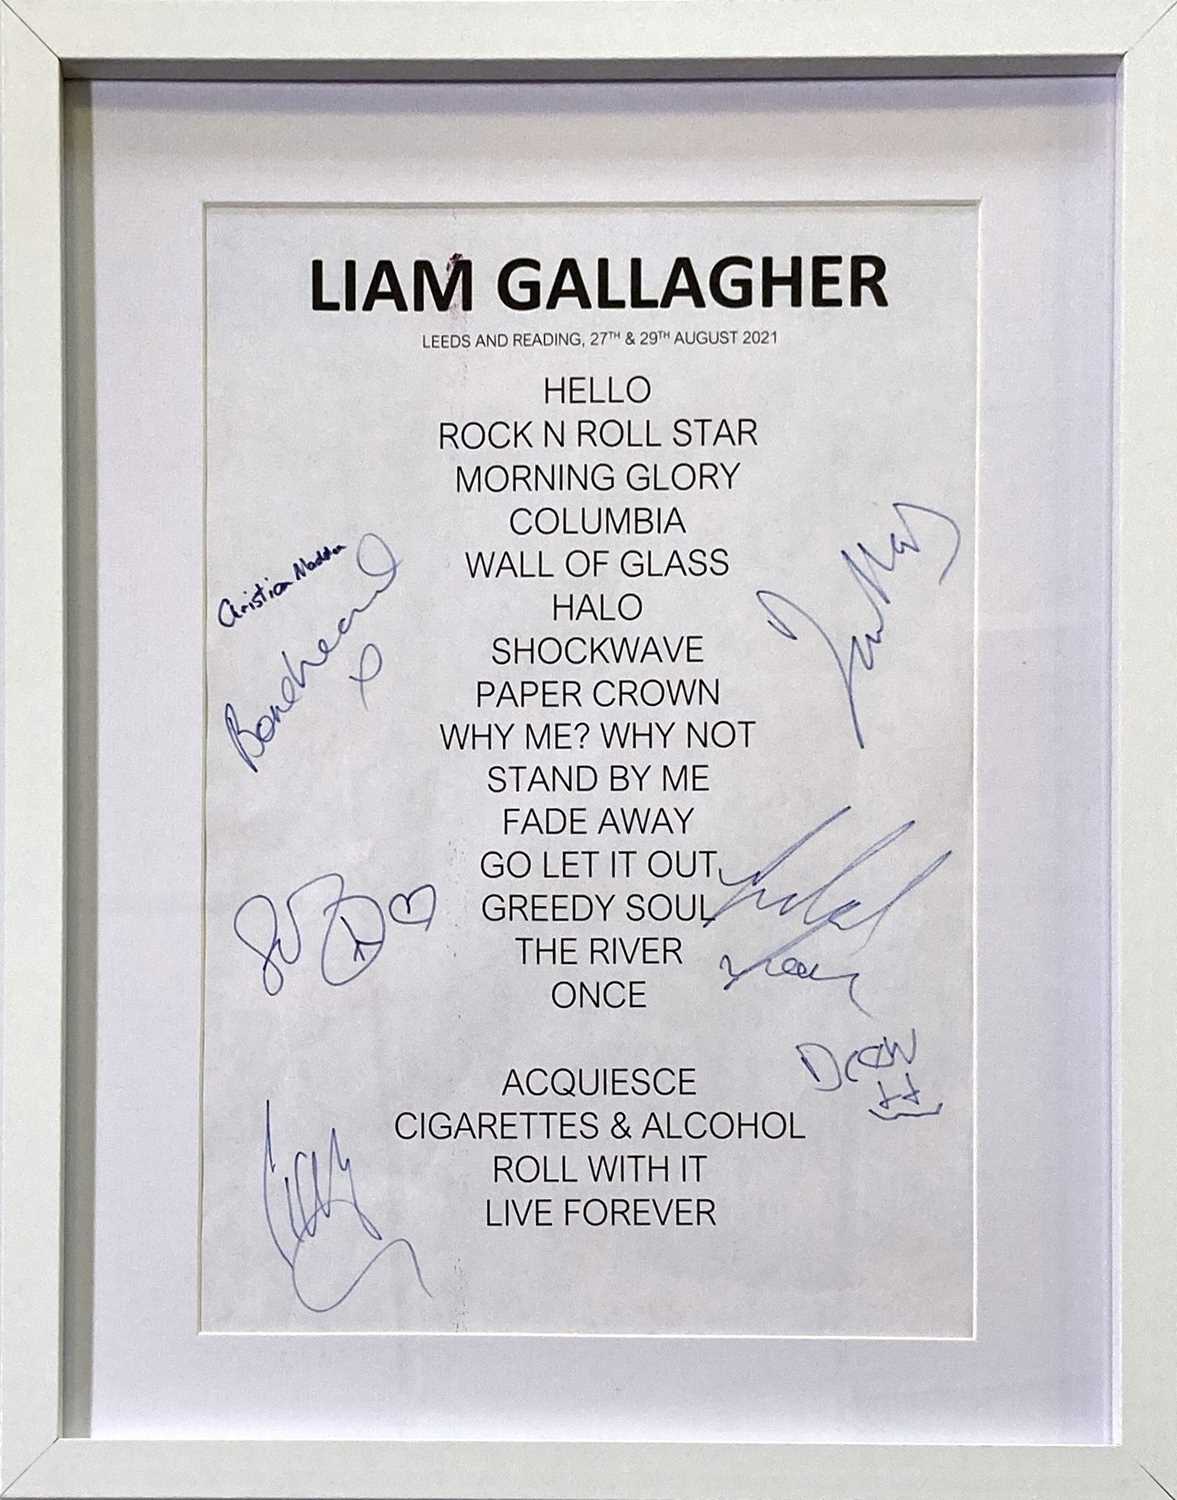 Lot 380 - ROCK AND ROLL AUCTION FOR DEAF AWARENESS - LIAM GALLAGHER SIGNED SET LIST.